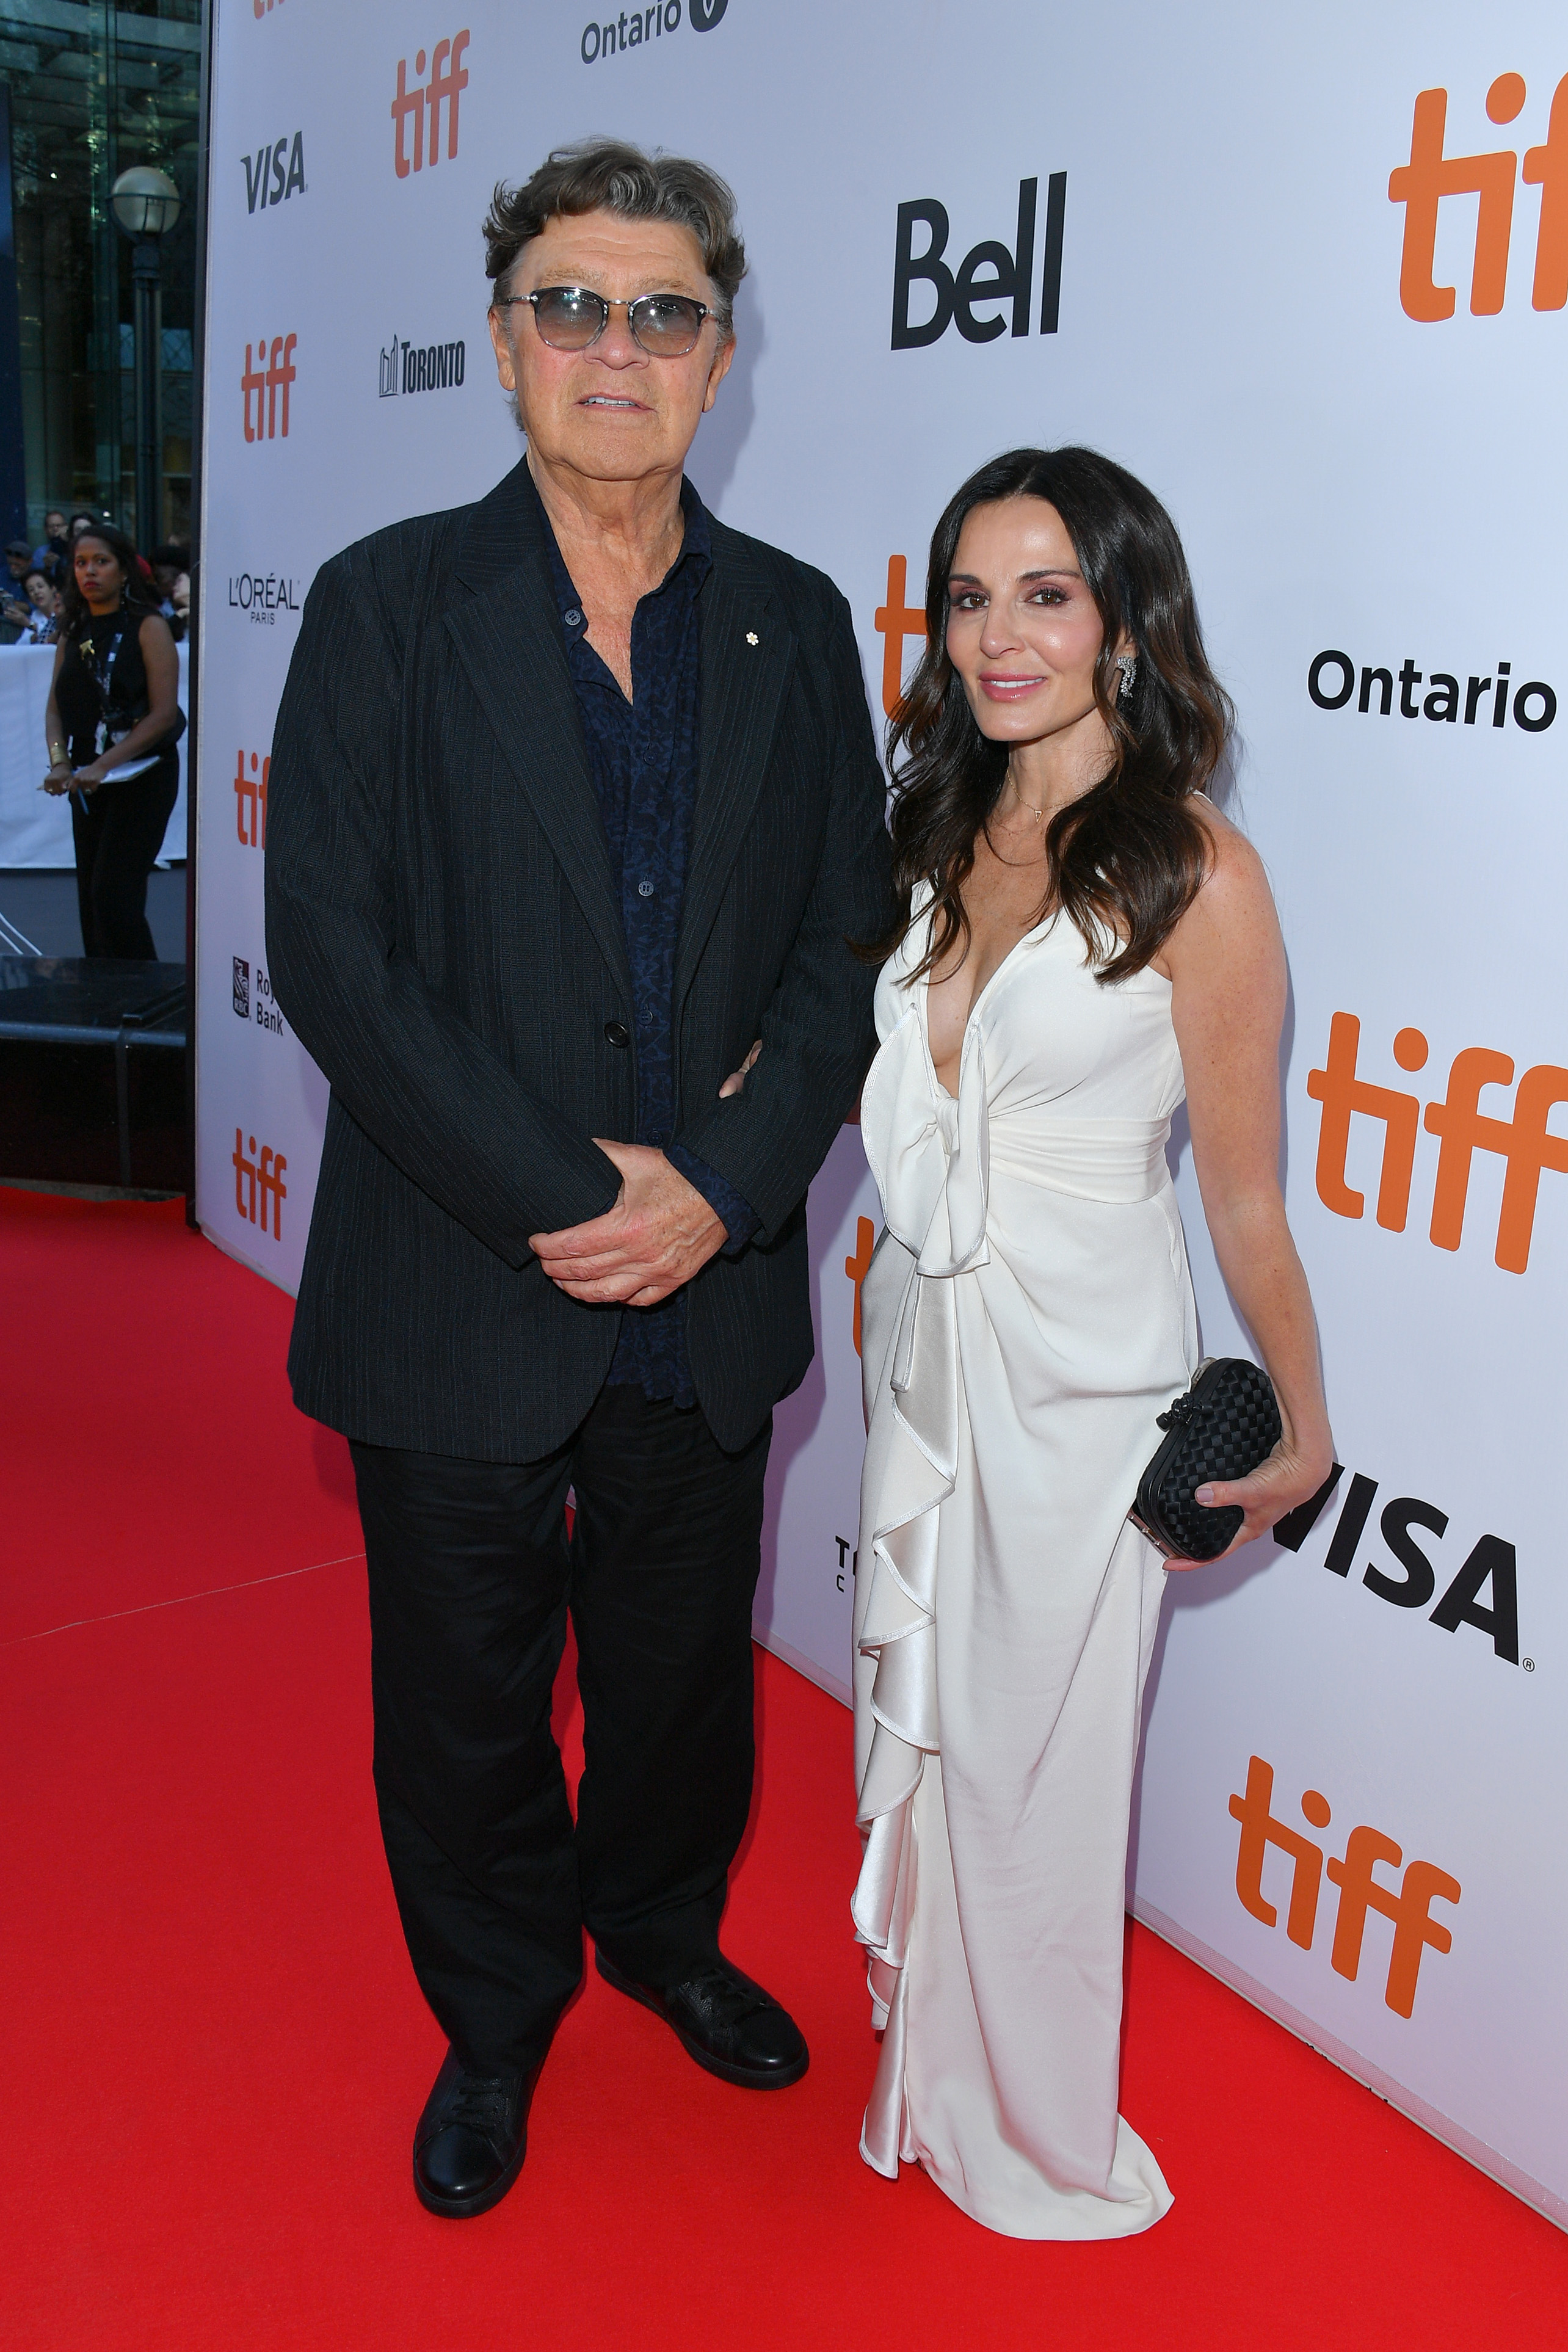 Robbie Robertson and Janet Zuccarini at Roy Thomson Hall on September 05, 2019, in Toronto, Canada. | Source: Getty Images